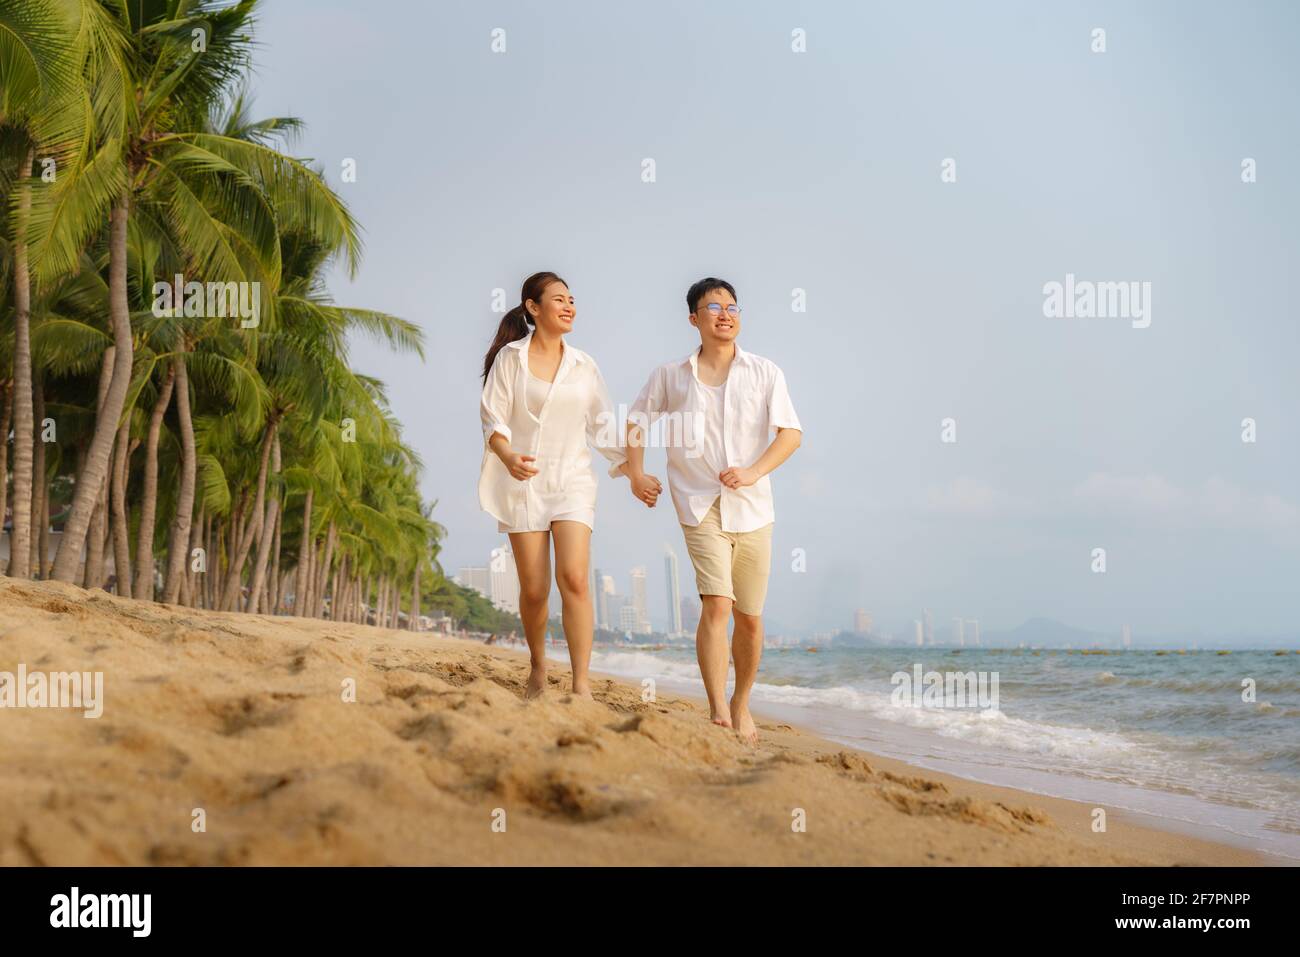 Asian couple is running and holding hand on a beachfront beach sea with coconut trees while on vacation in the summer in Thailand. Stock Photo